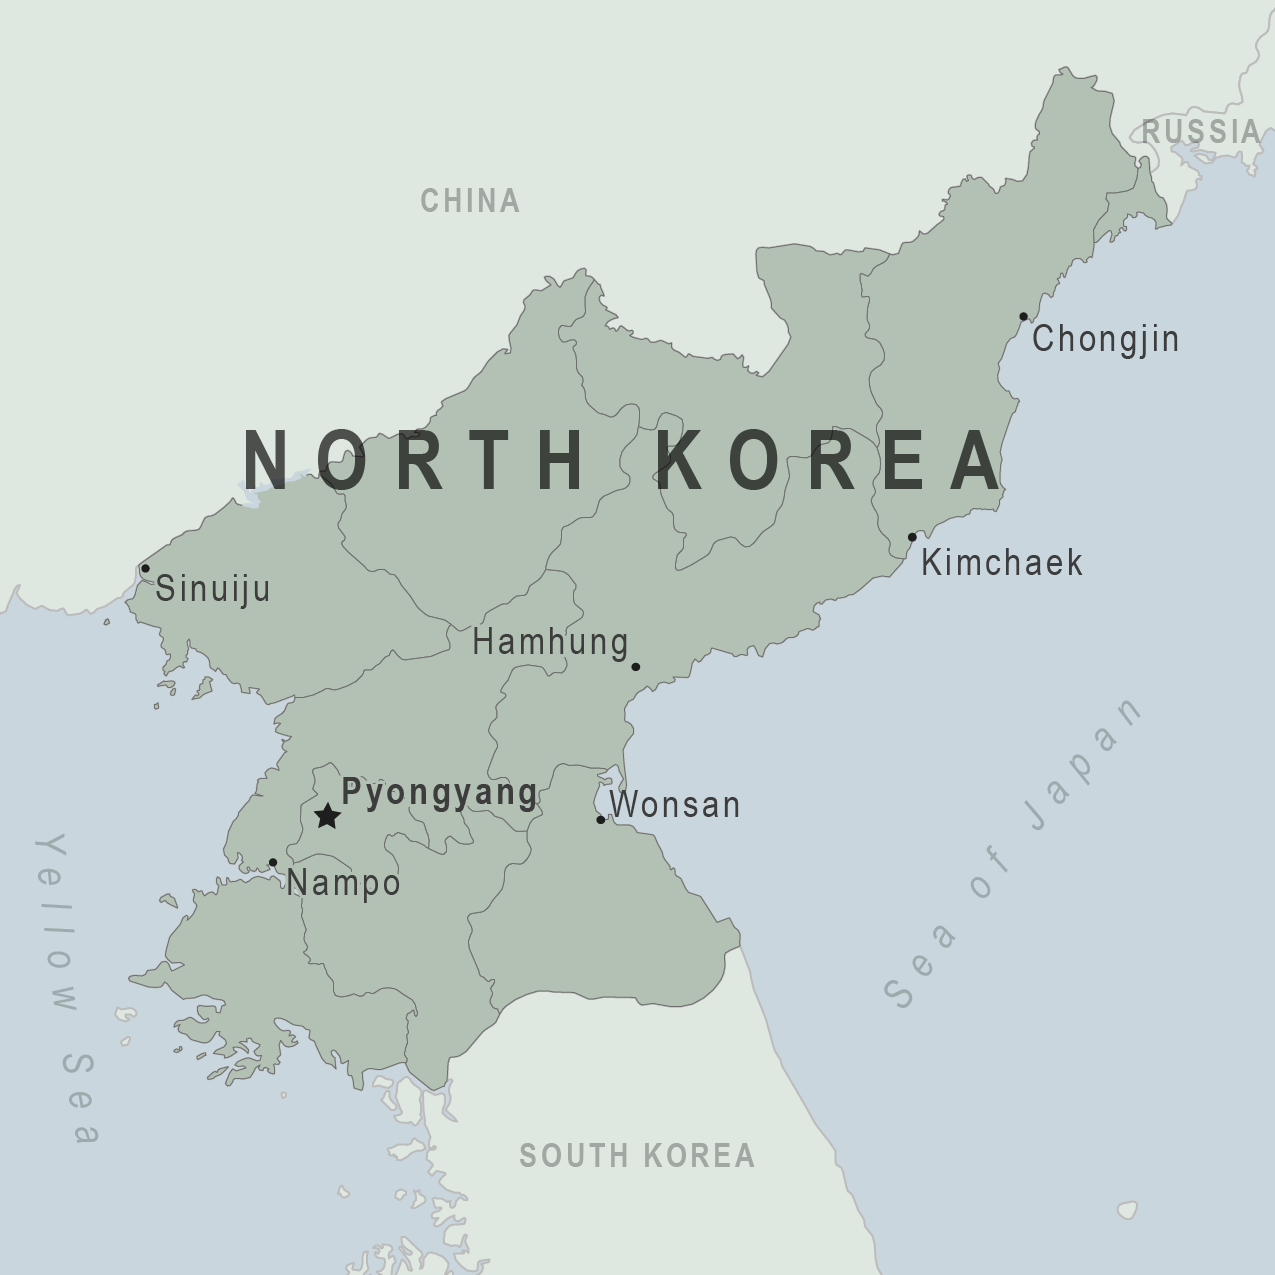 http://wwwnc.cdc.gov/travel/images/map-north-korea.png